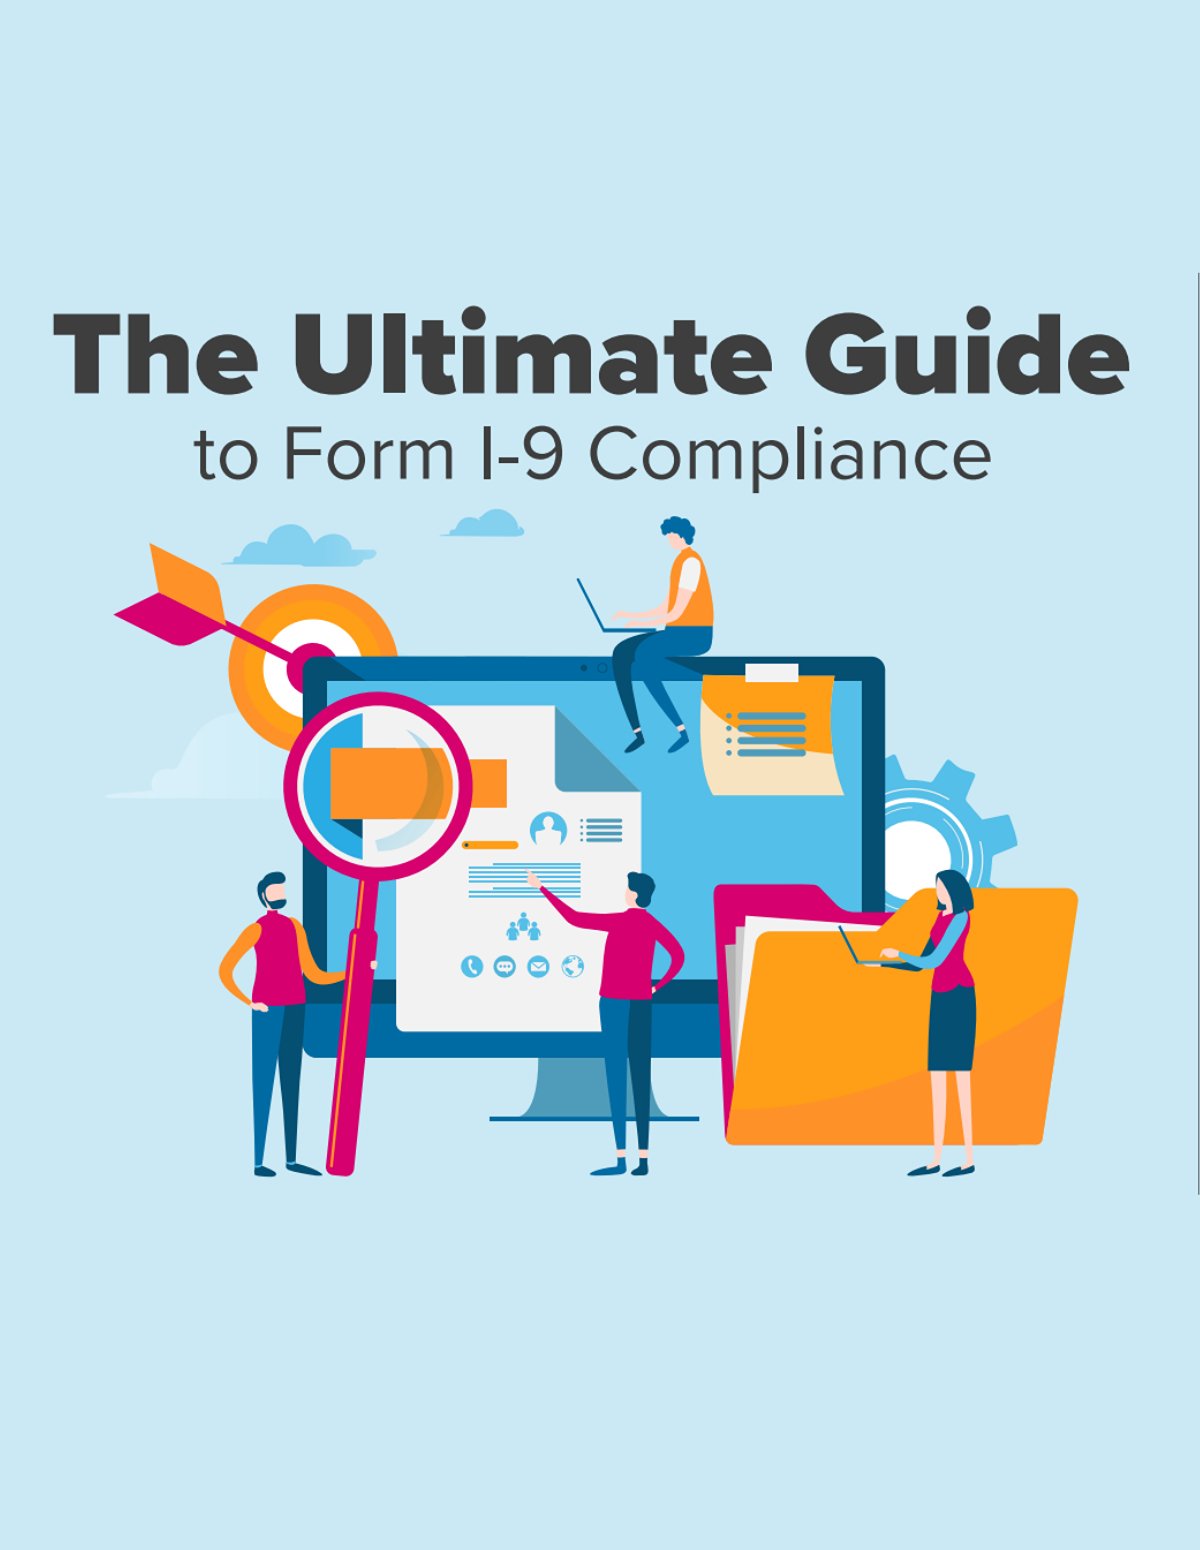 The Ultimate Guide to Form I-9 Compliance